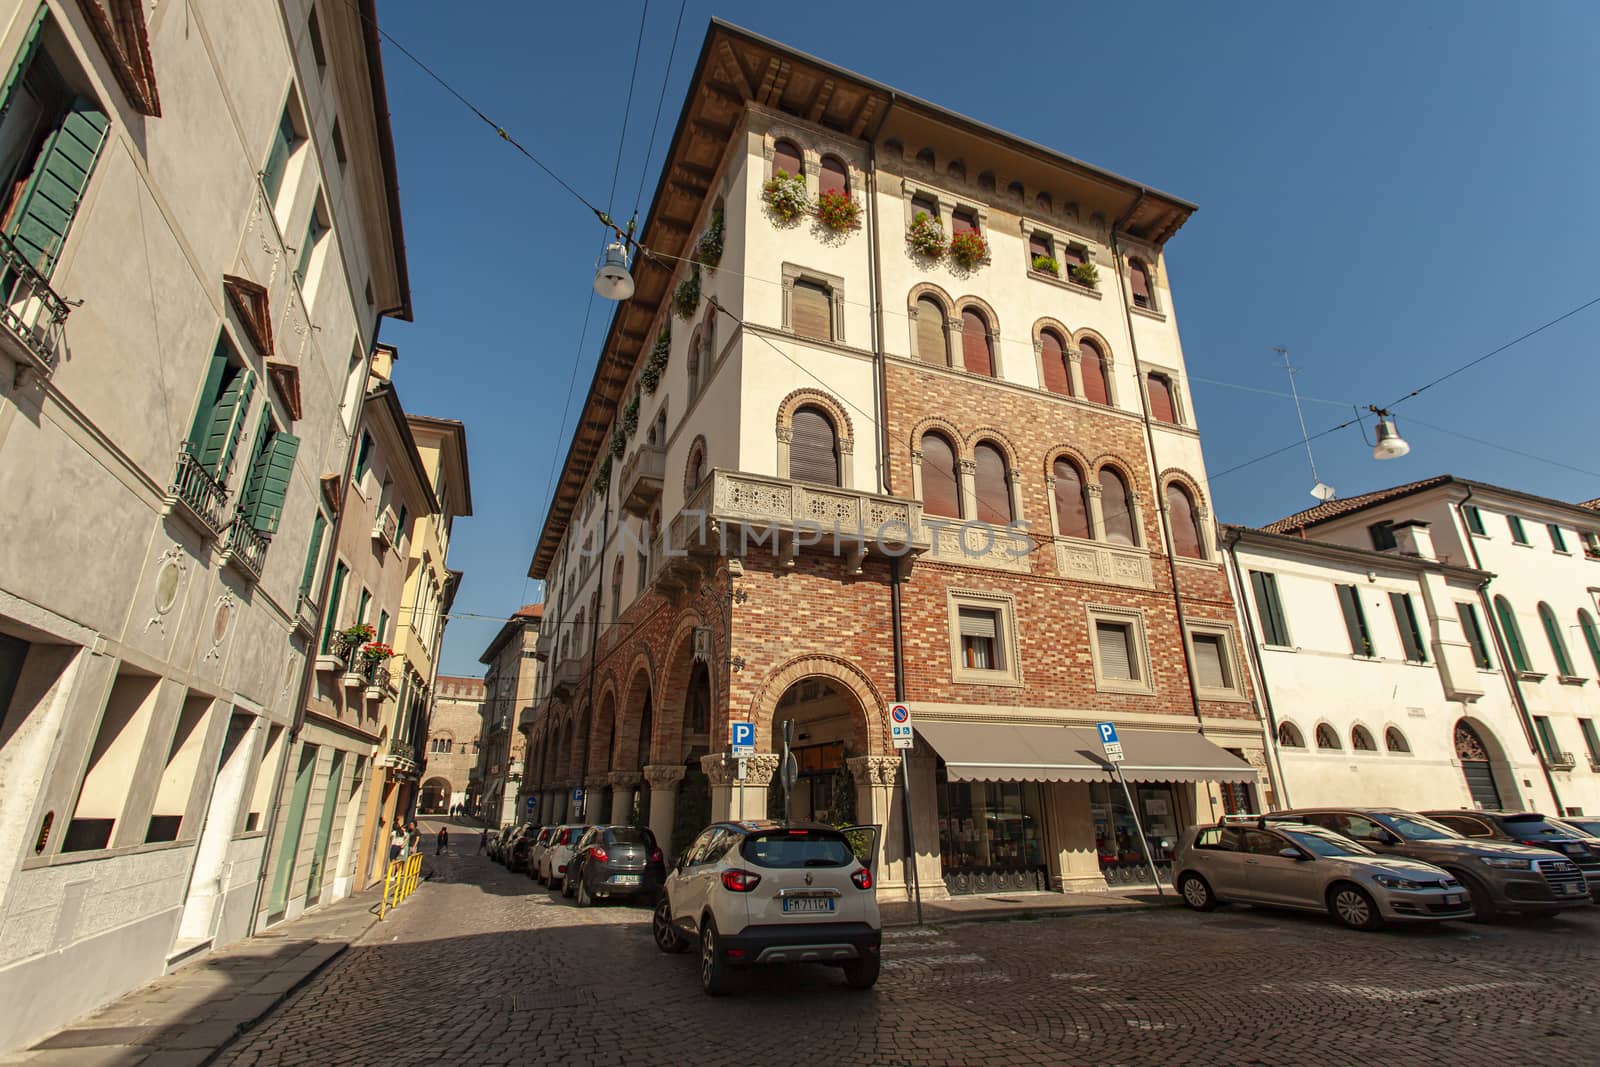 Historical buildings with arcades in Treviso by pippocarlot